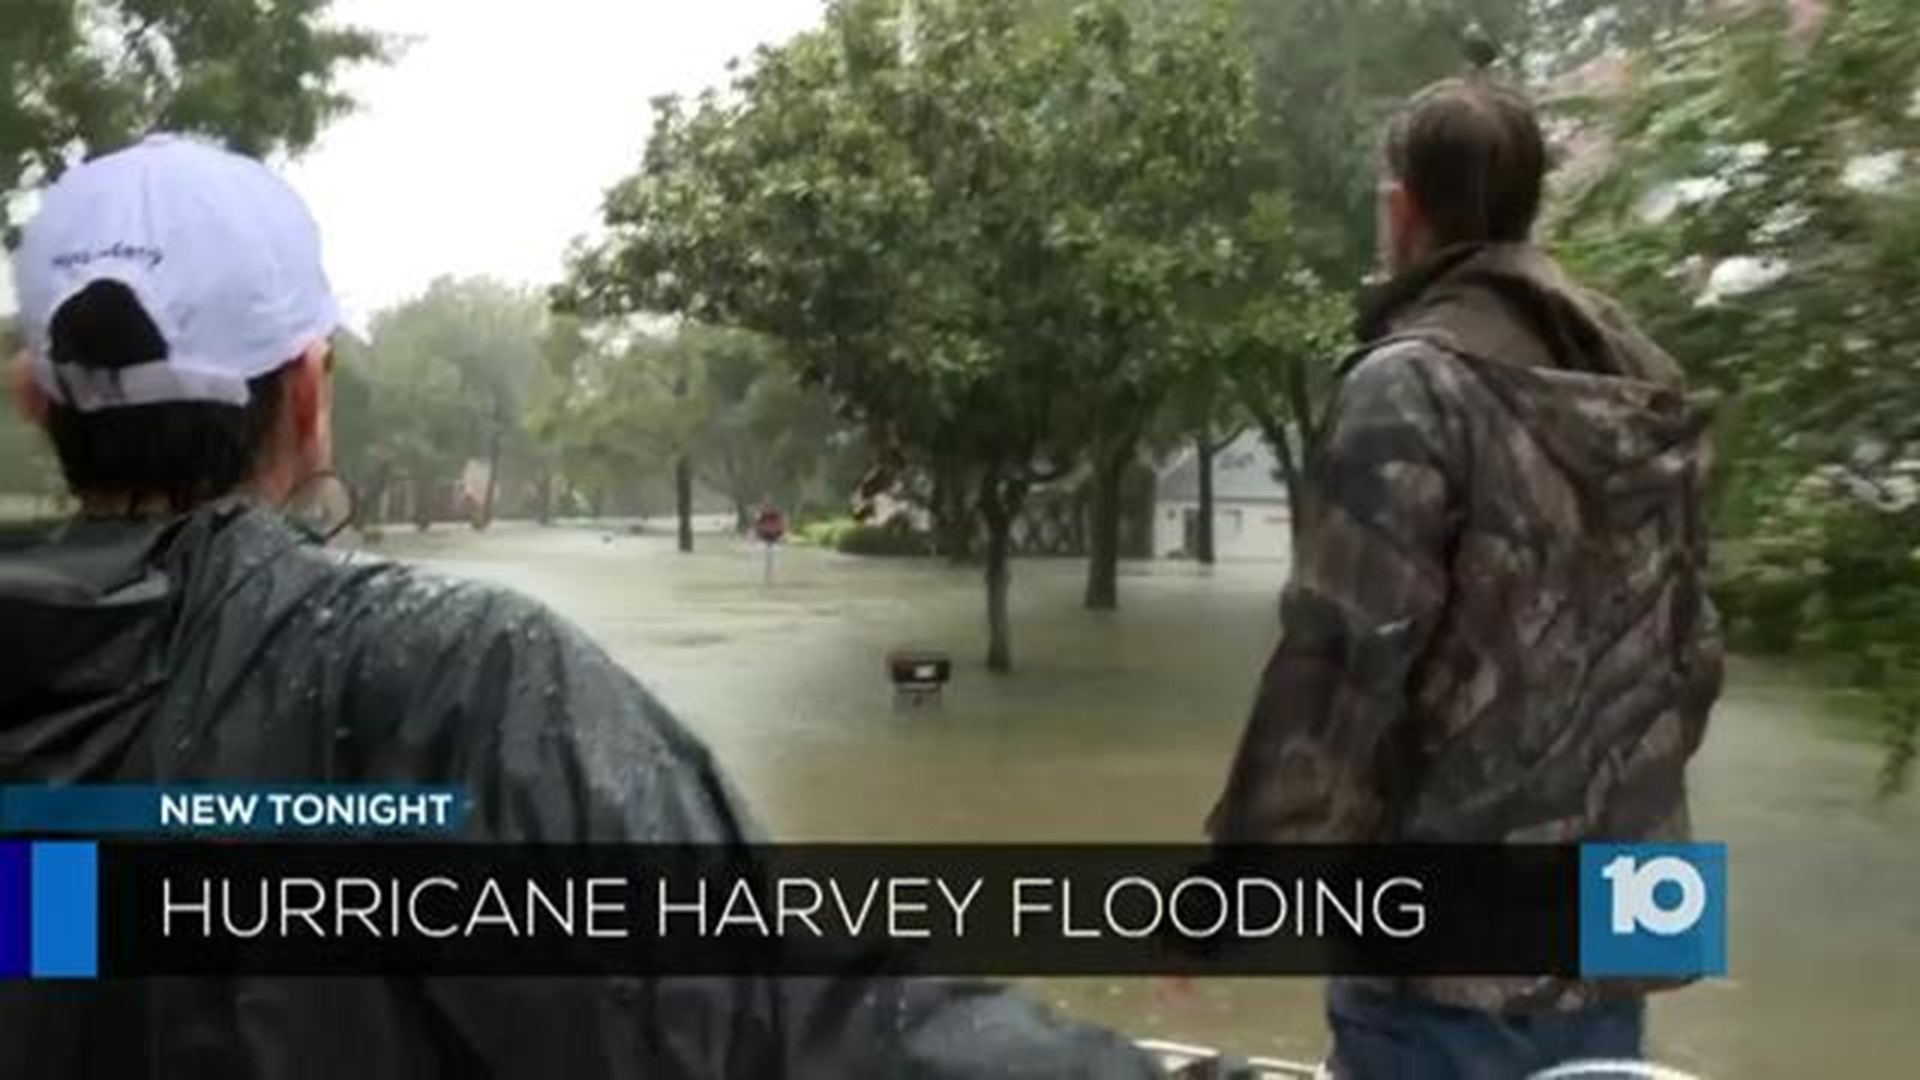 Harvey continues to impact Texas